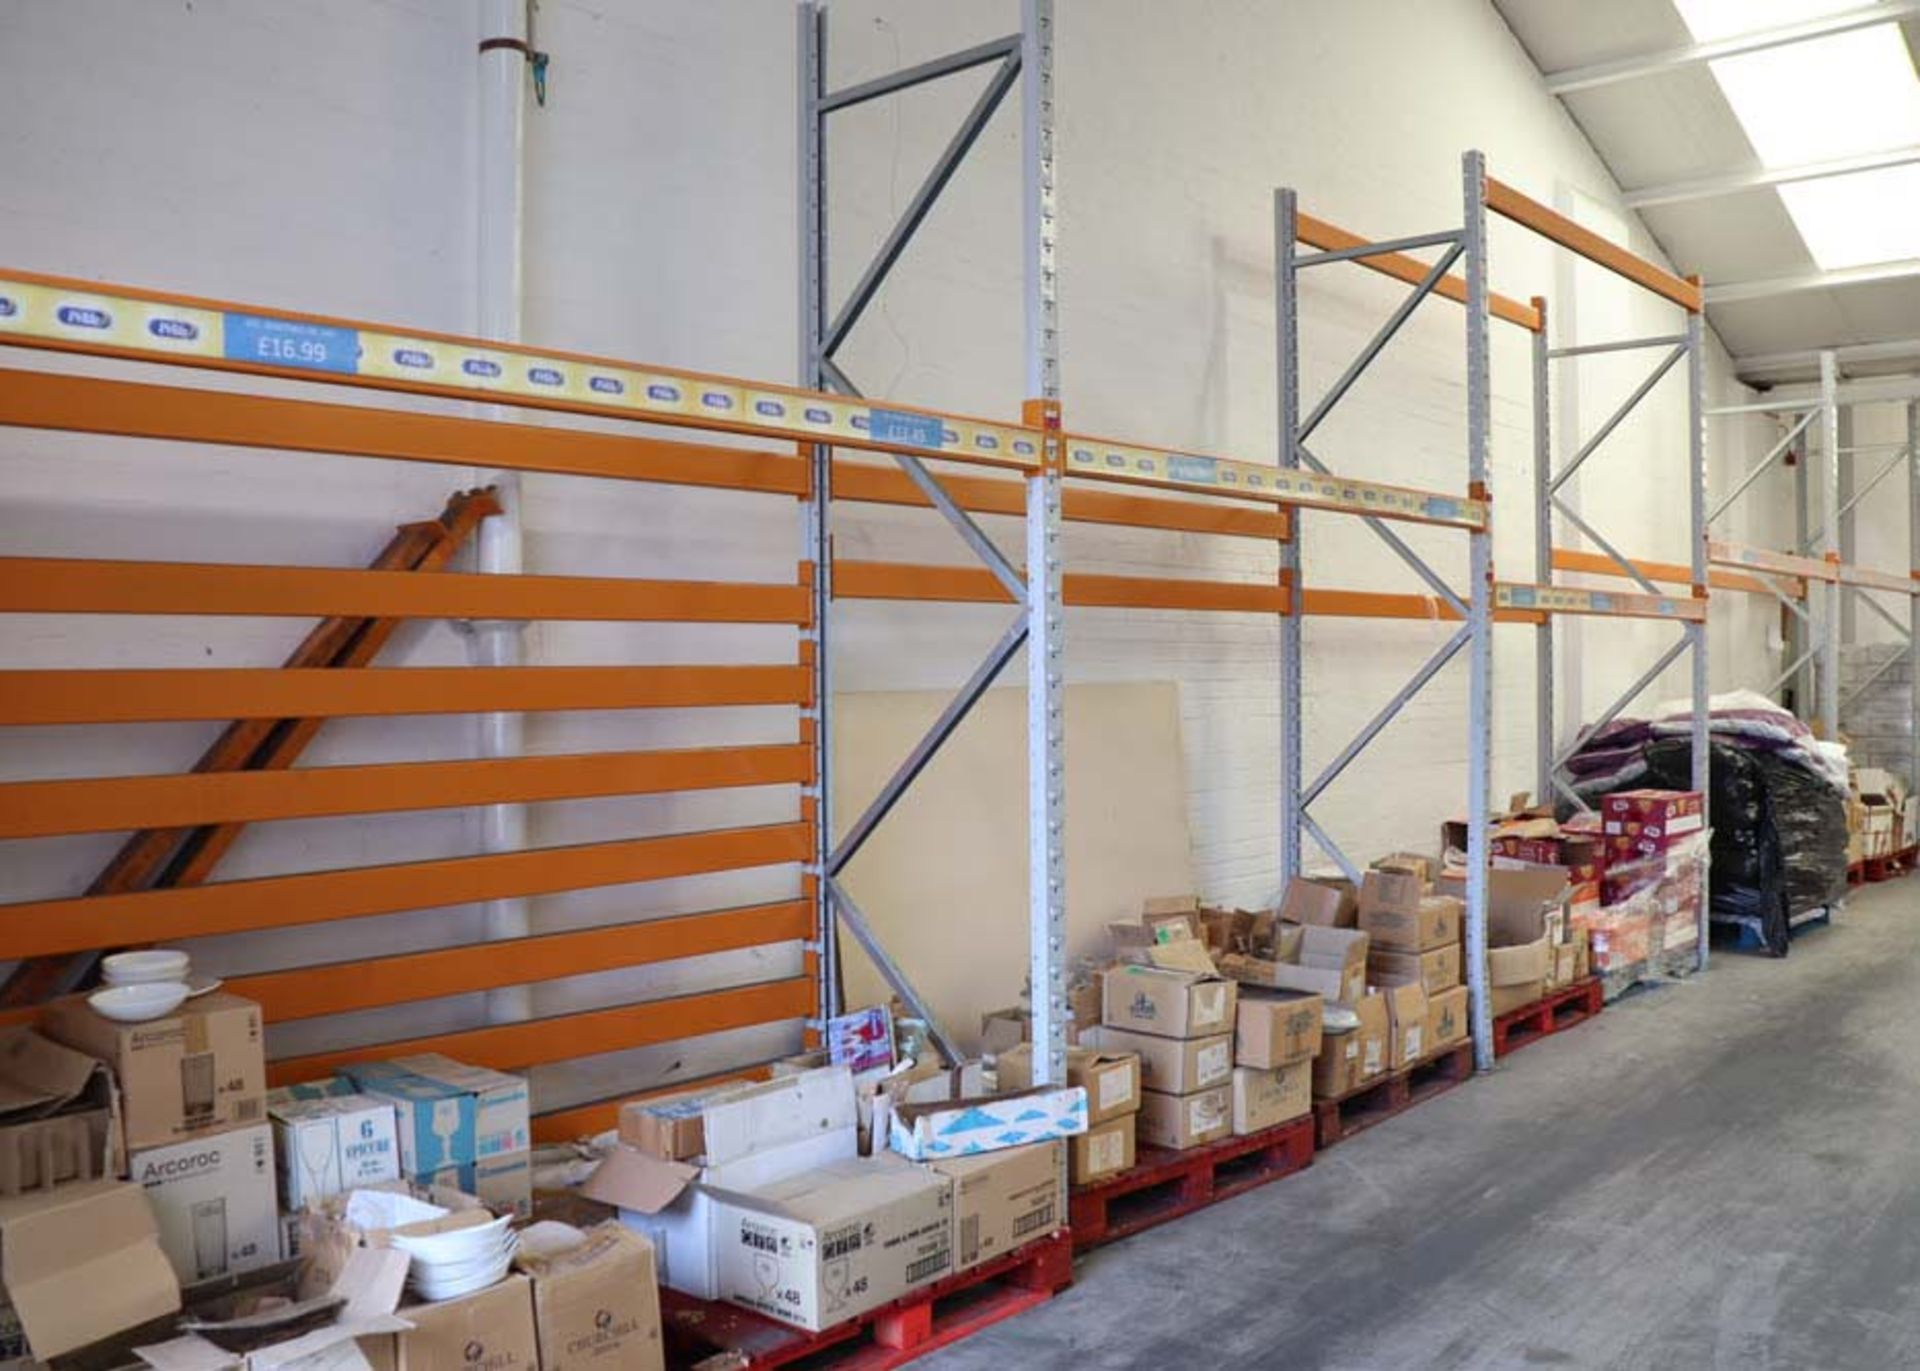 33 running bays of Apex UK 8 boltless pallet racking in orange and grey, with 38 x 3.5 metre - Image 5 of 5